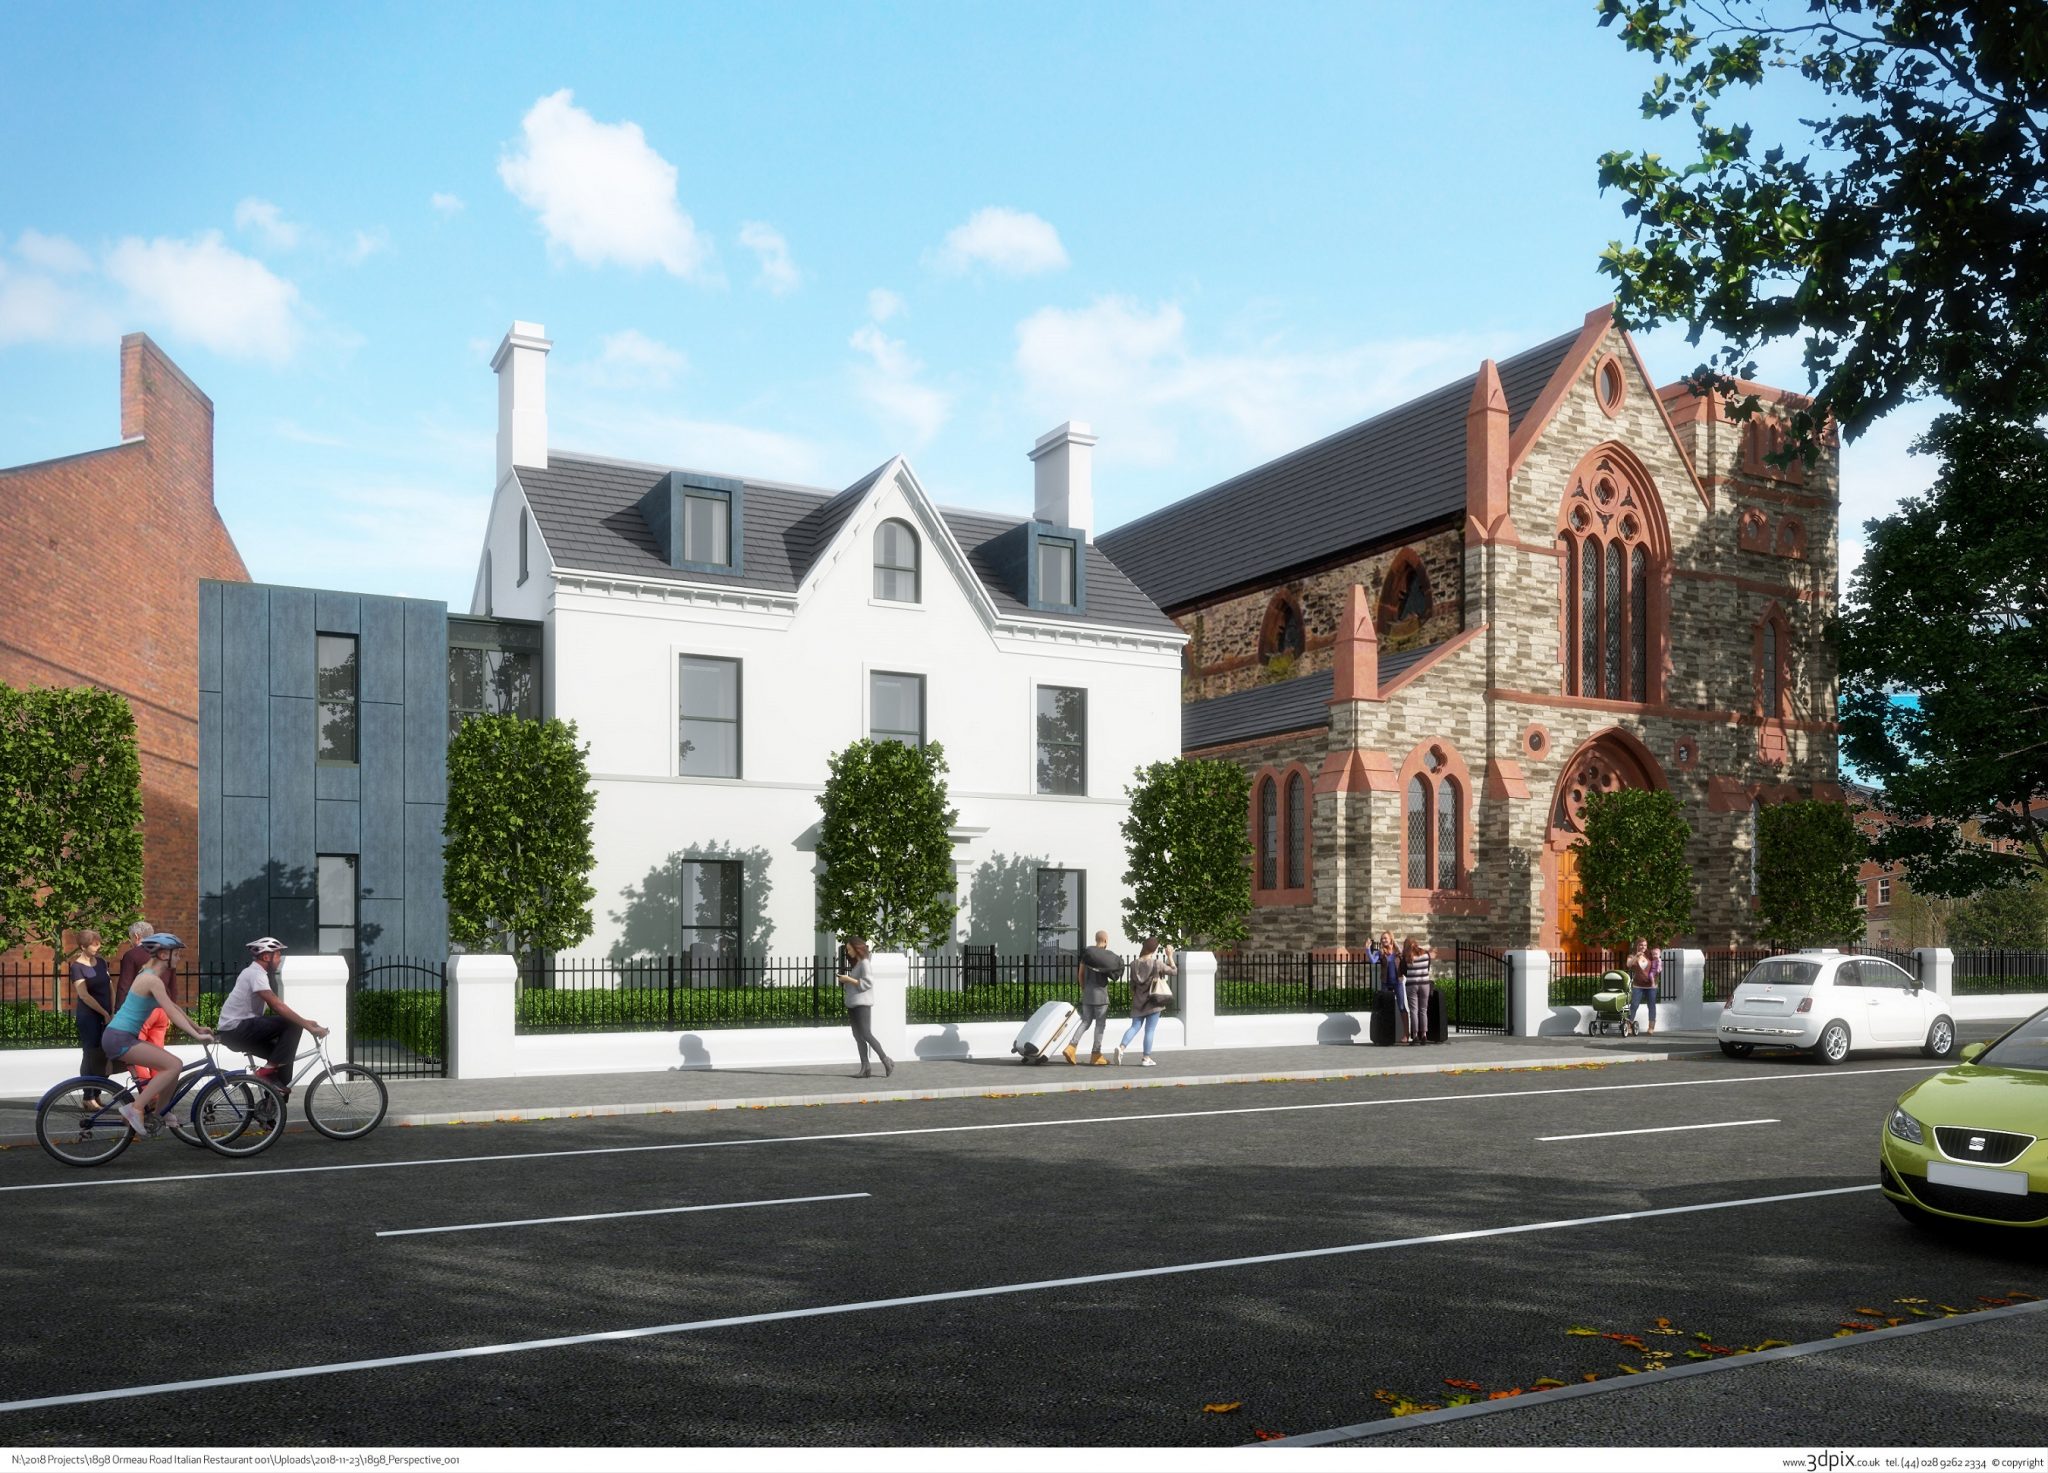 Approval sought for £8m hotel and restaurant in former Belfast church